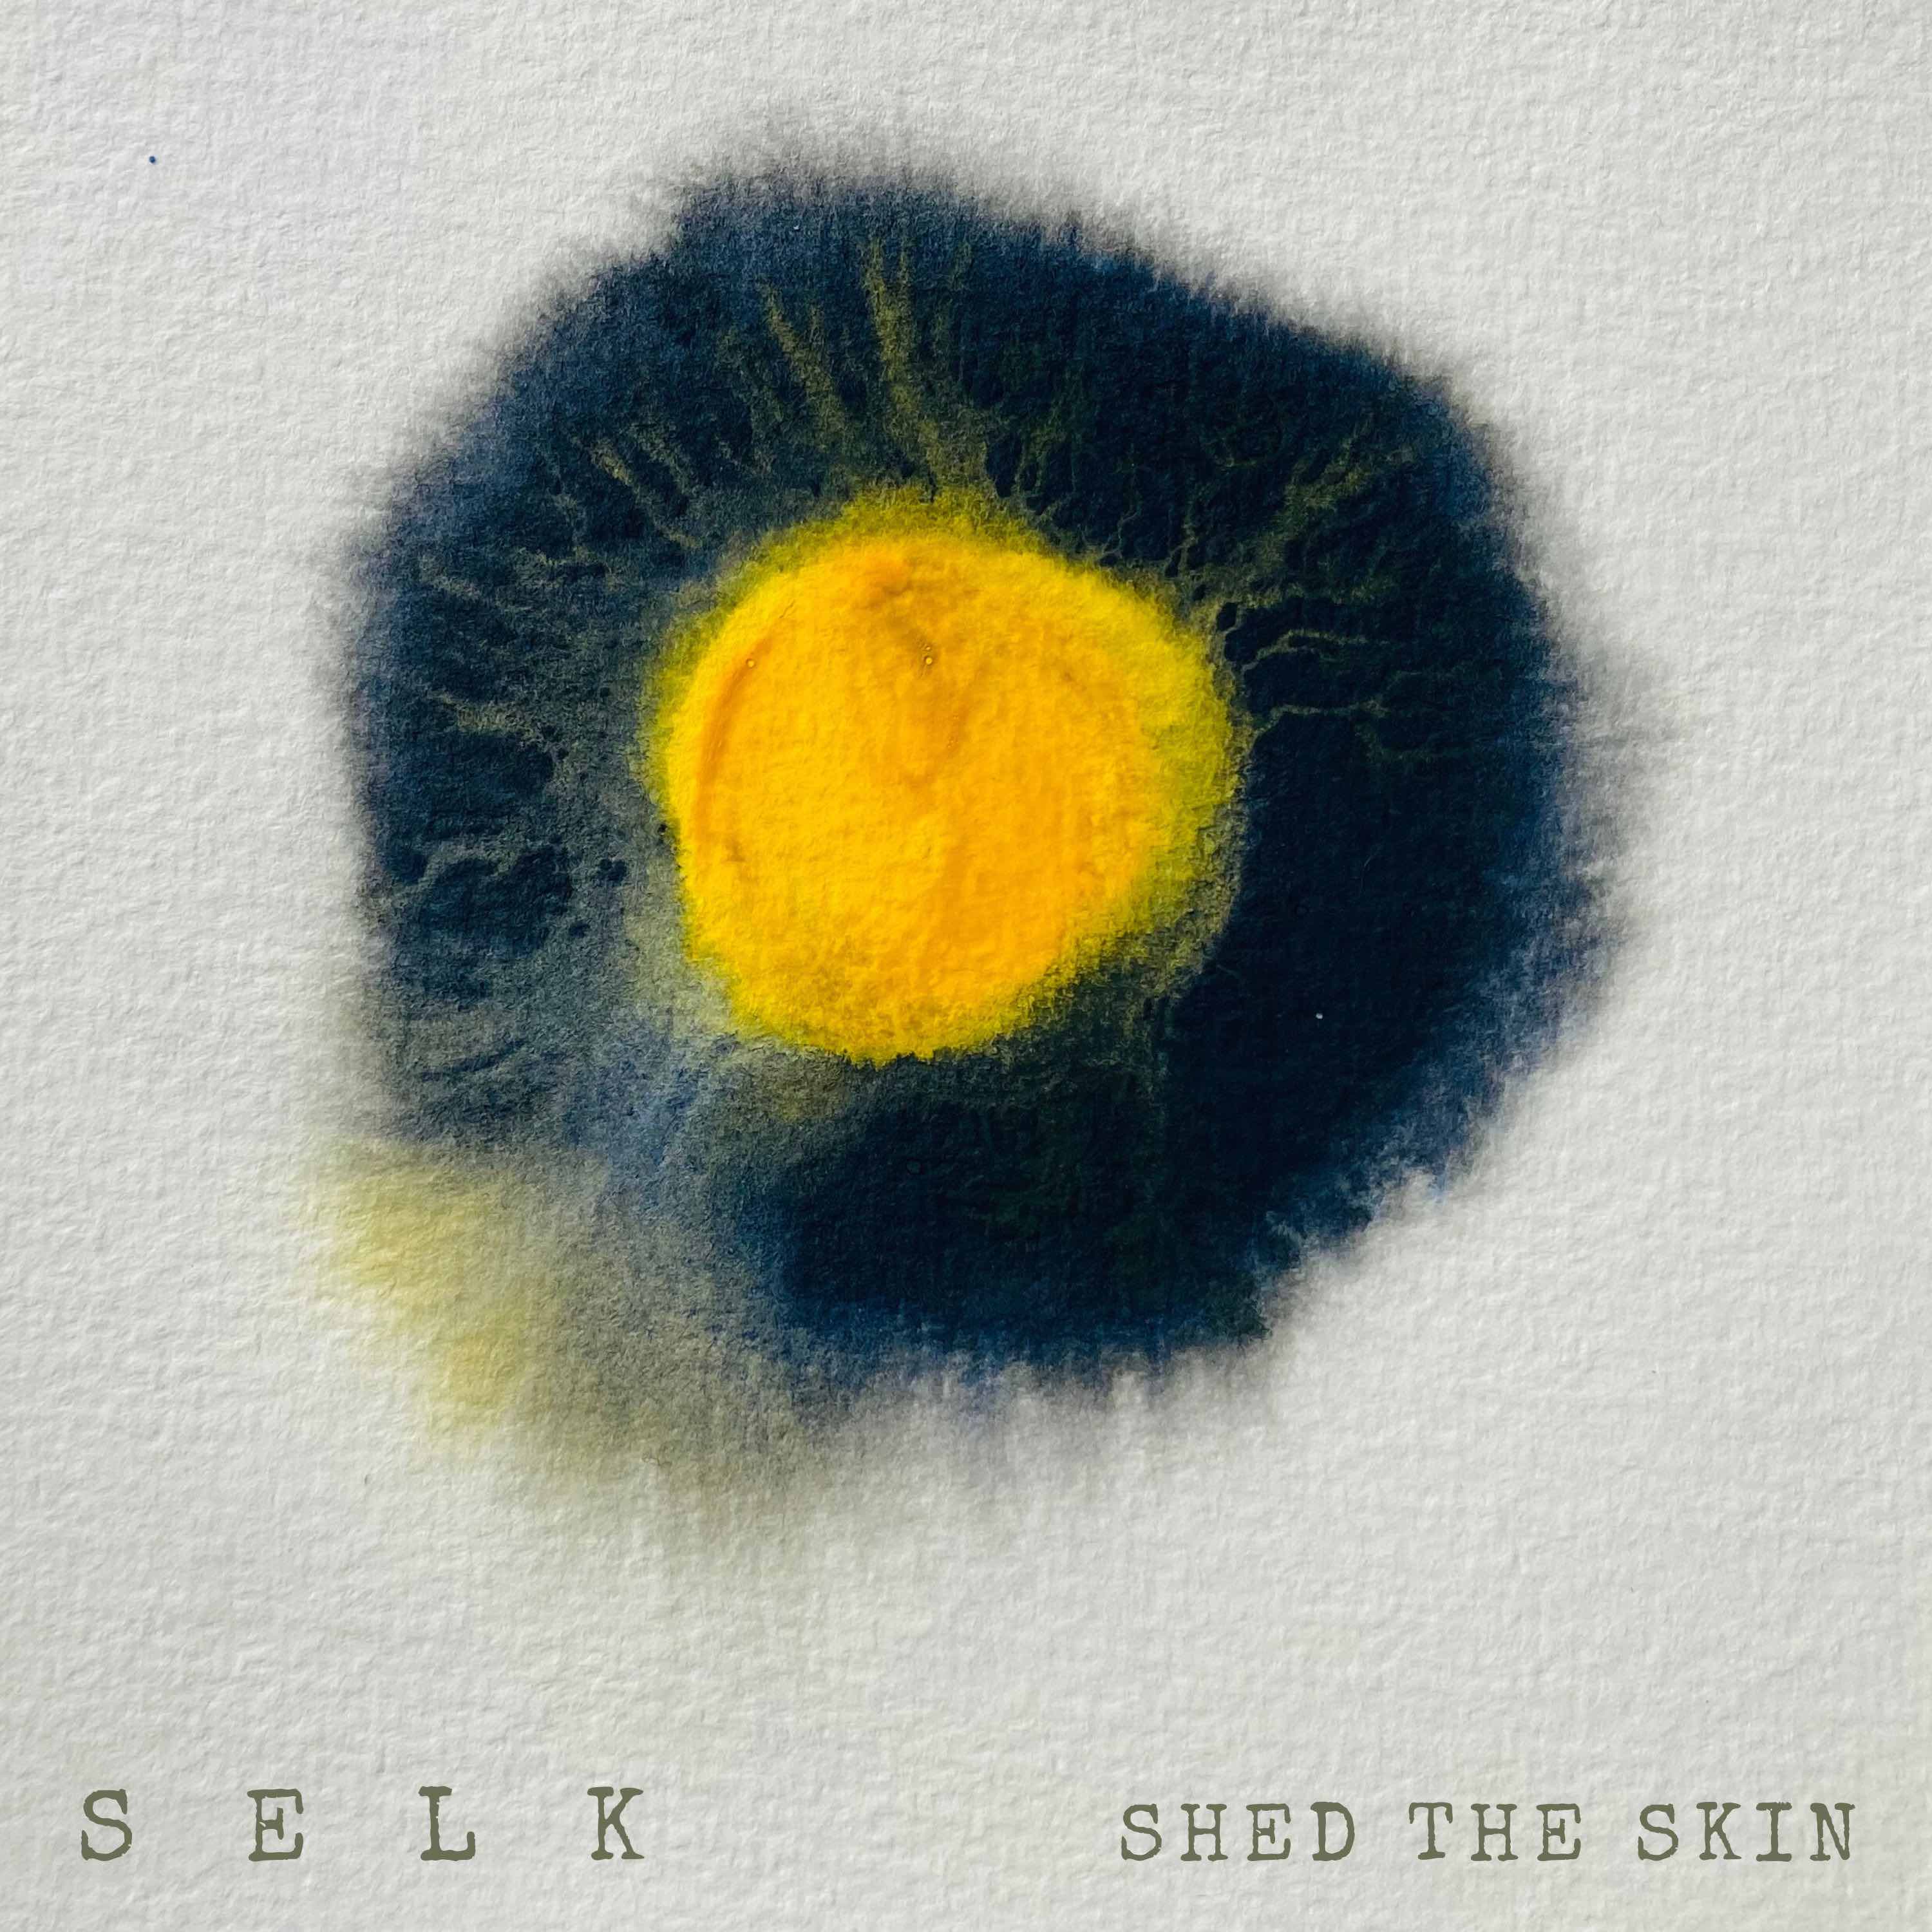 ALBUM REVIEW: Shed the Skin by Selk